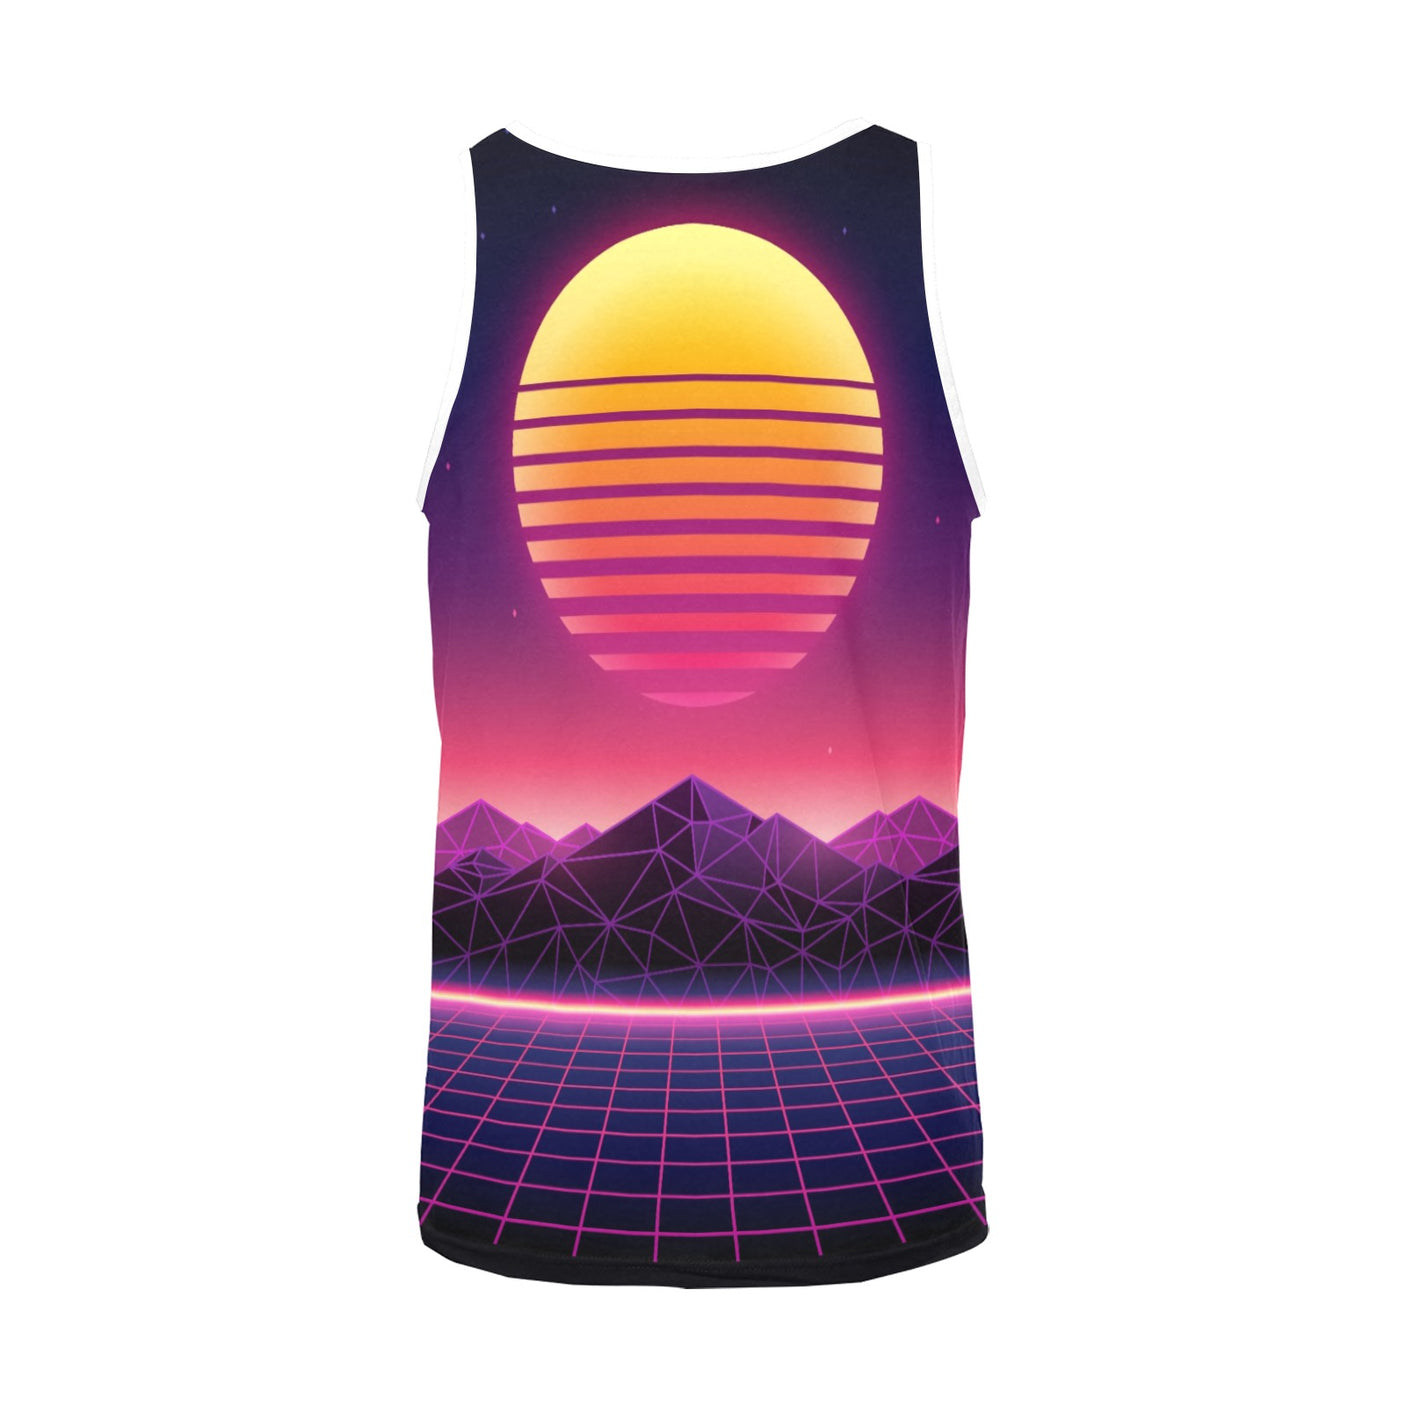 Synthwave Tank Top